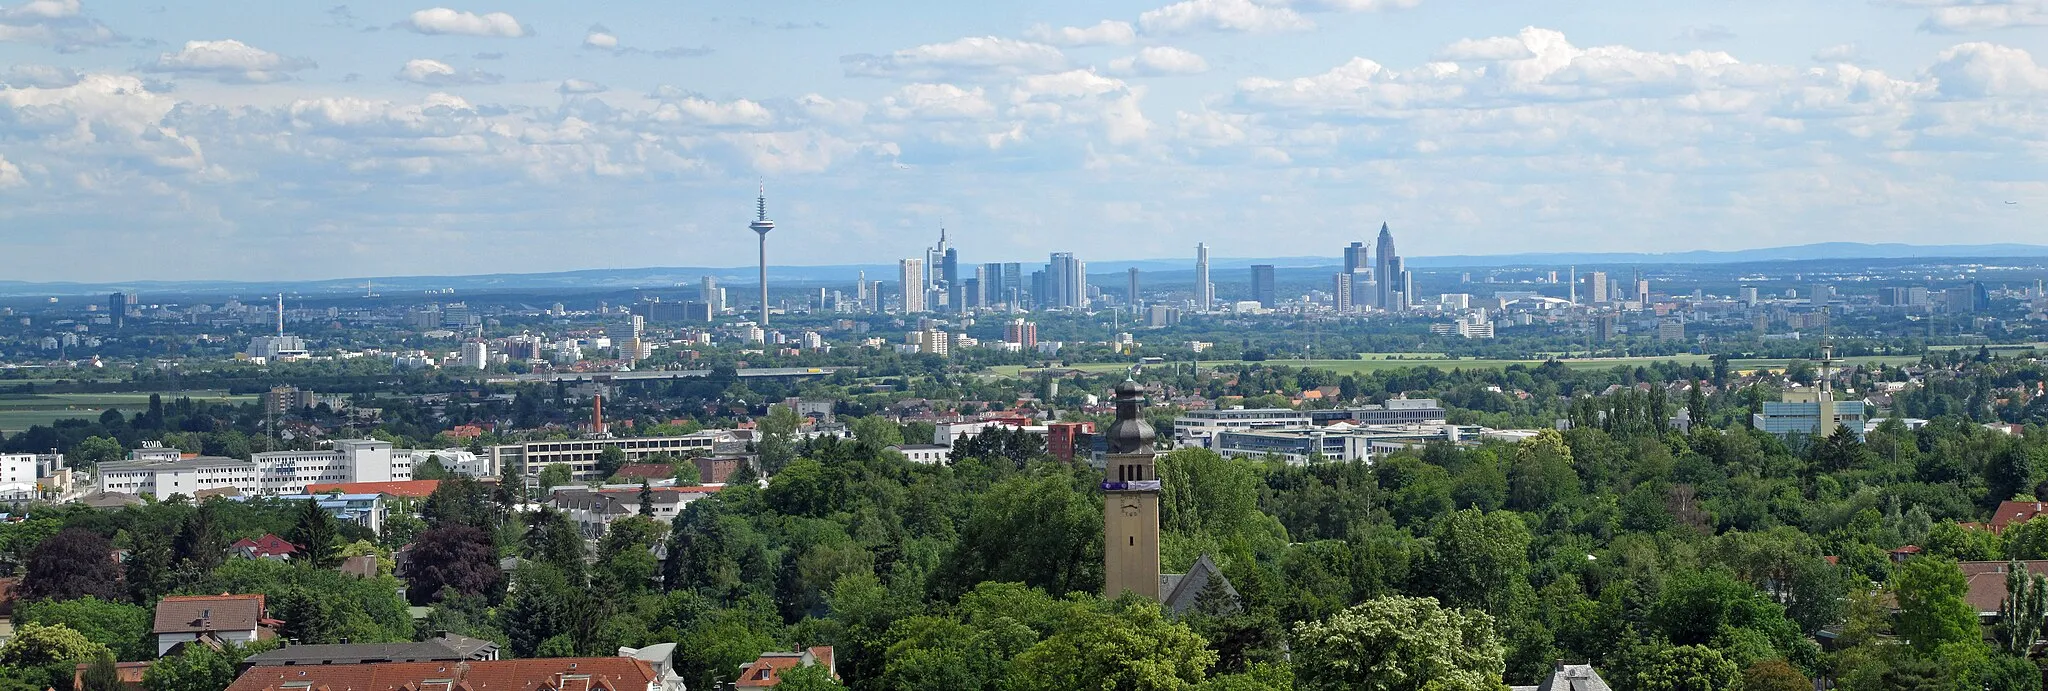 Photo showing: Frankfurt am Main, seen from tower of St. Ursula in Oberursel, Hesse, Germany.